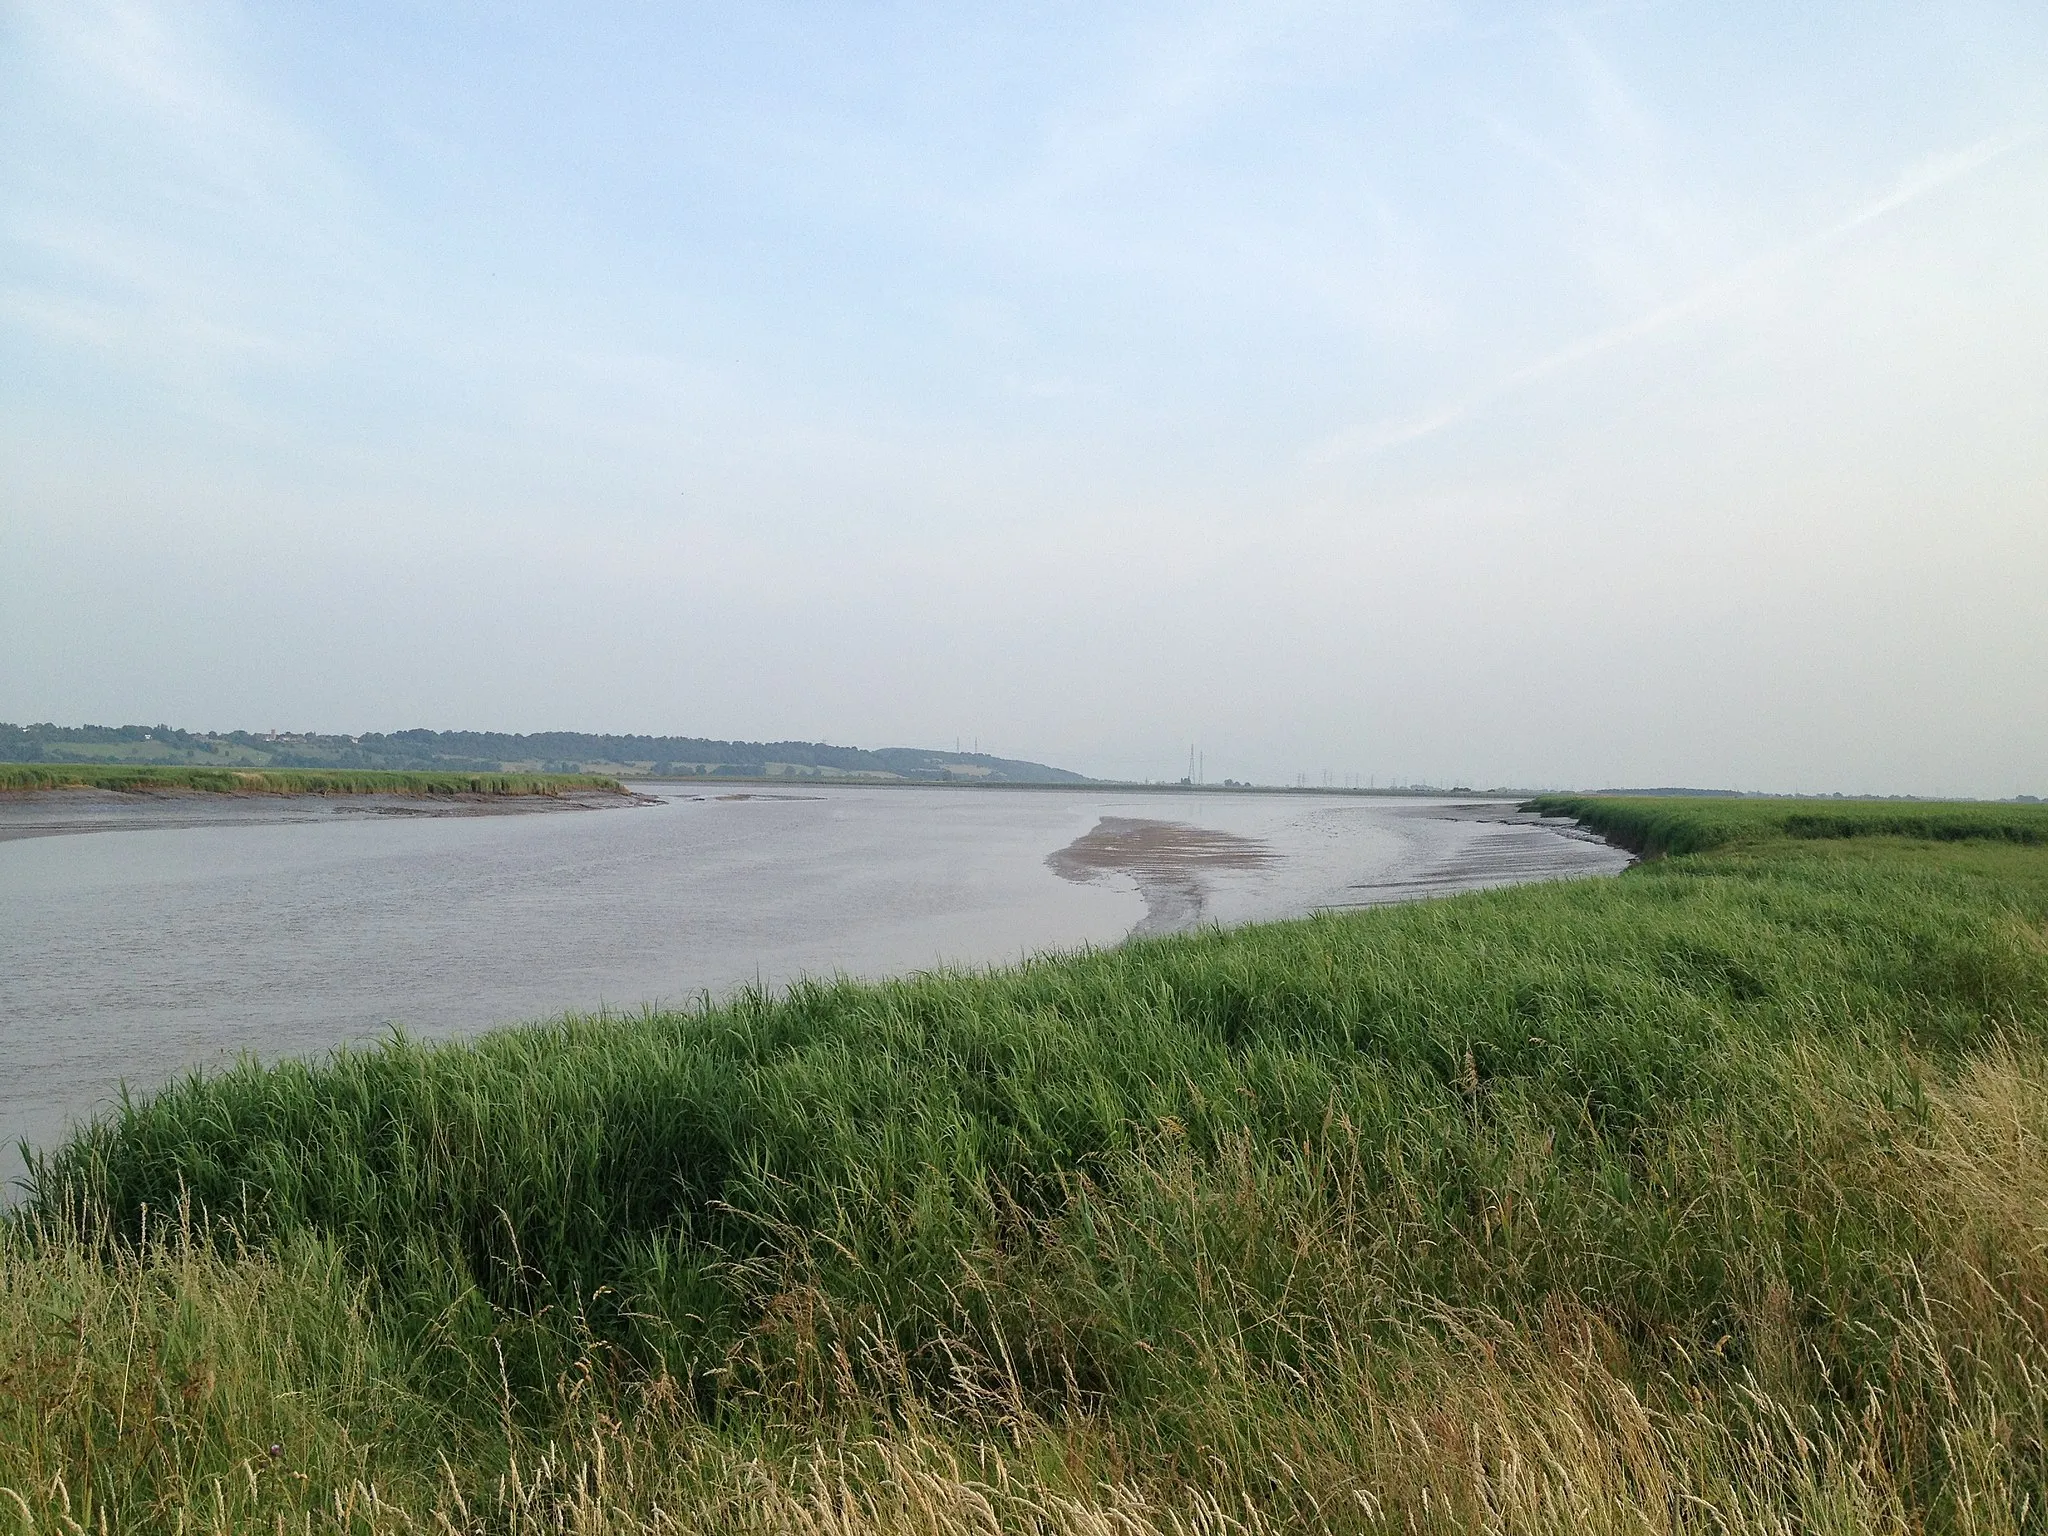 Photo showing: Looking west from the river bank at Faxfleet, East Riding of Yorkshire, England.